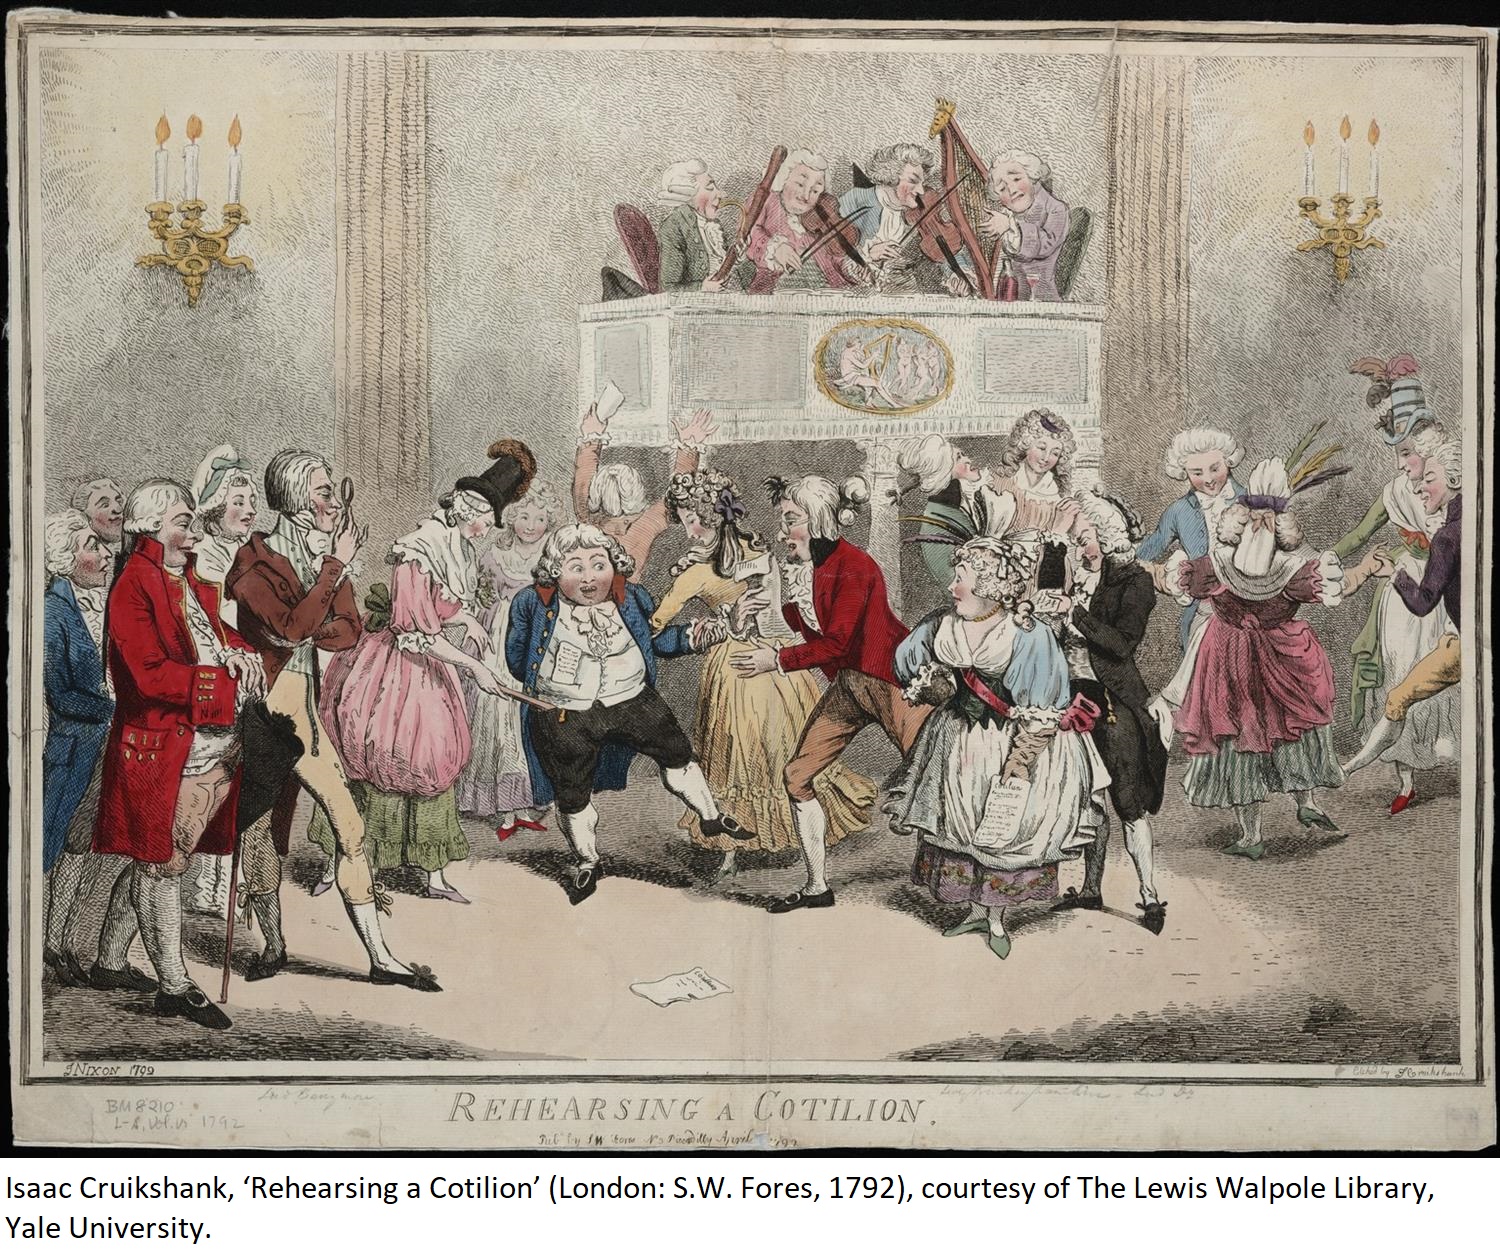 Isaac Cruikshank, ‘Rehearsing a Cotilion’ (London: S.W. Fores, 1792), courtesy of The Lewis Walpole Library, Yale University.